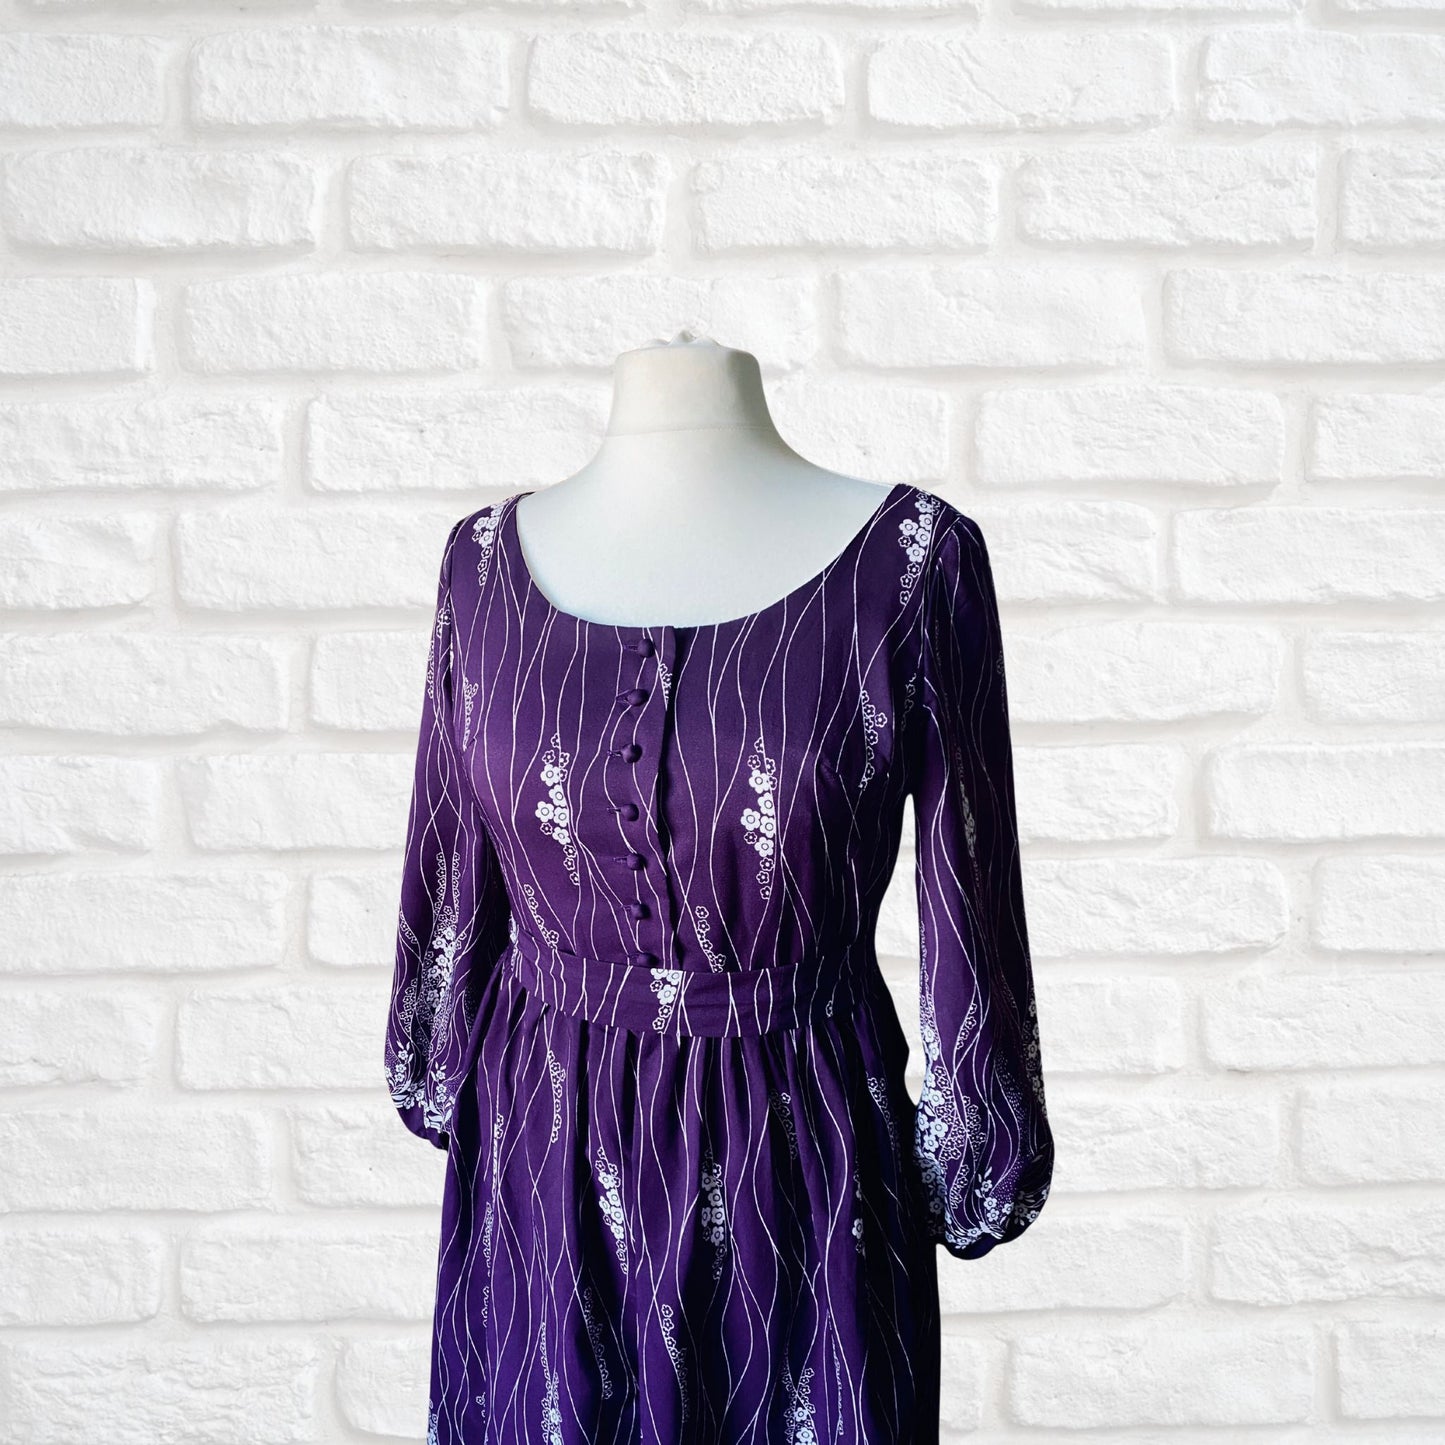 70s purple maxi with white floral print. Approx  U.K size 14 -16